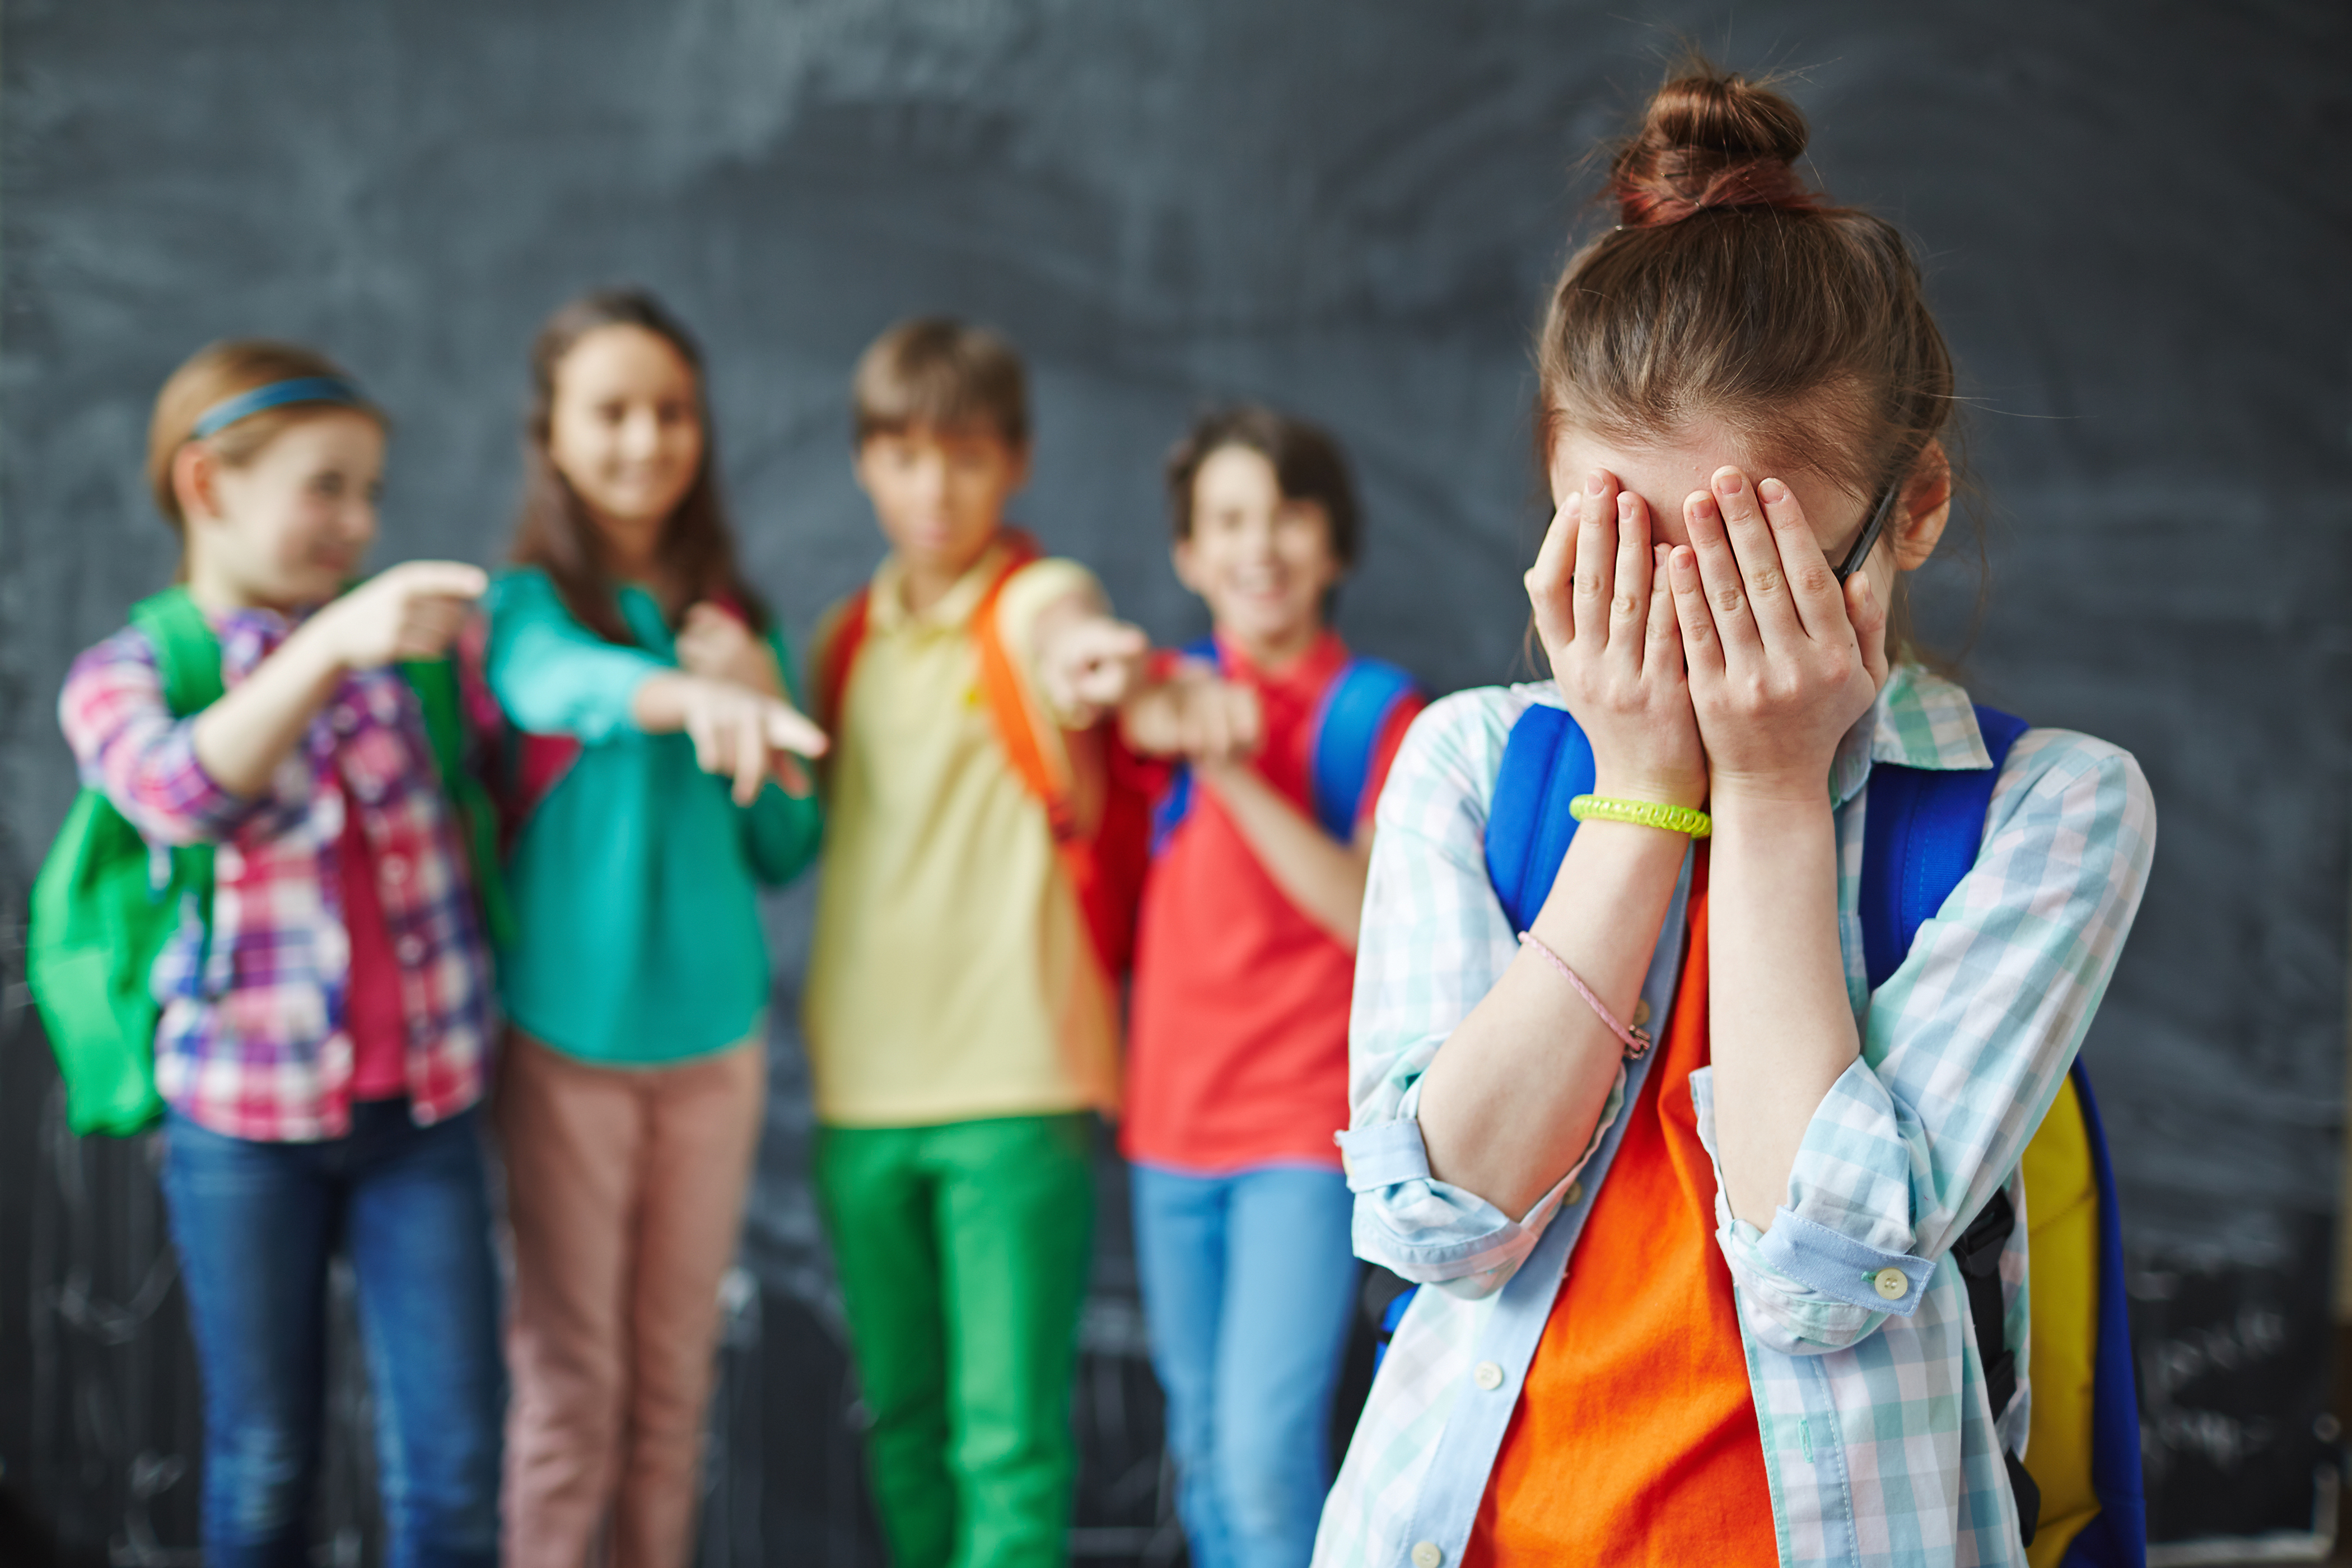 A group of kid bullies and a girl crying | Source: Shutterstock